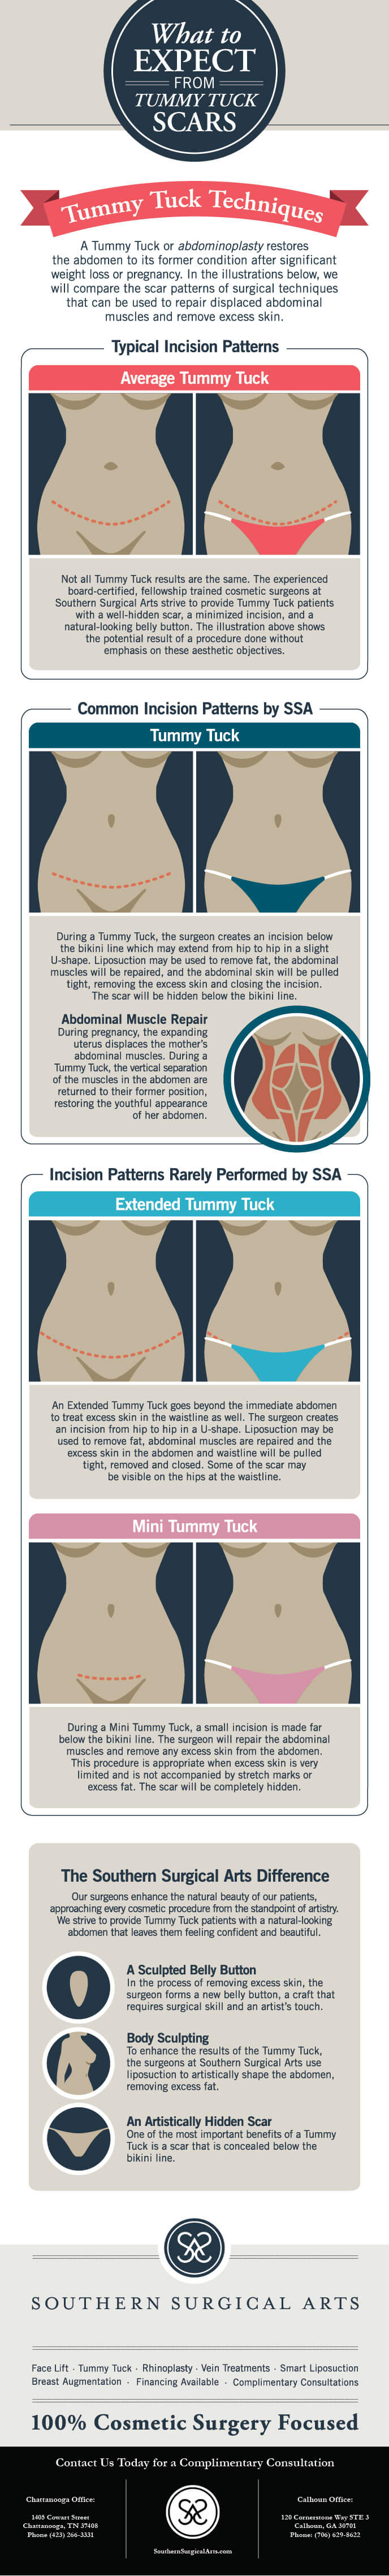 When Should You Consider Tummy Tuck Revision Surgery? Learn How to